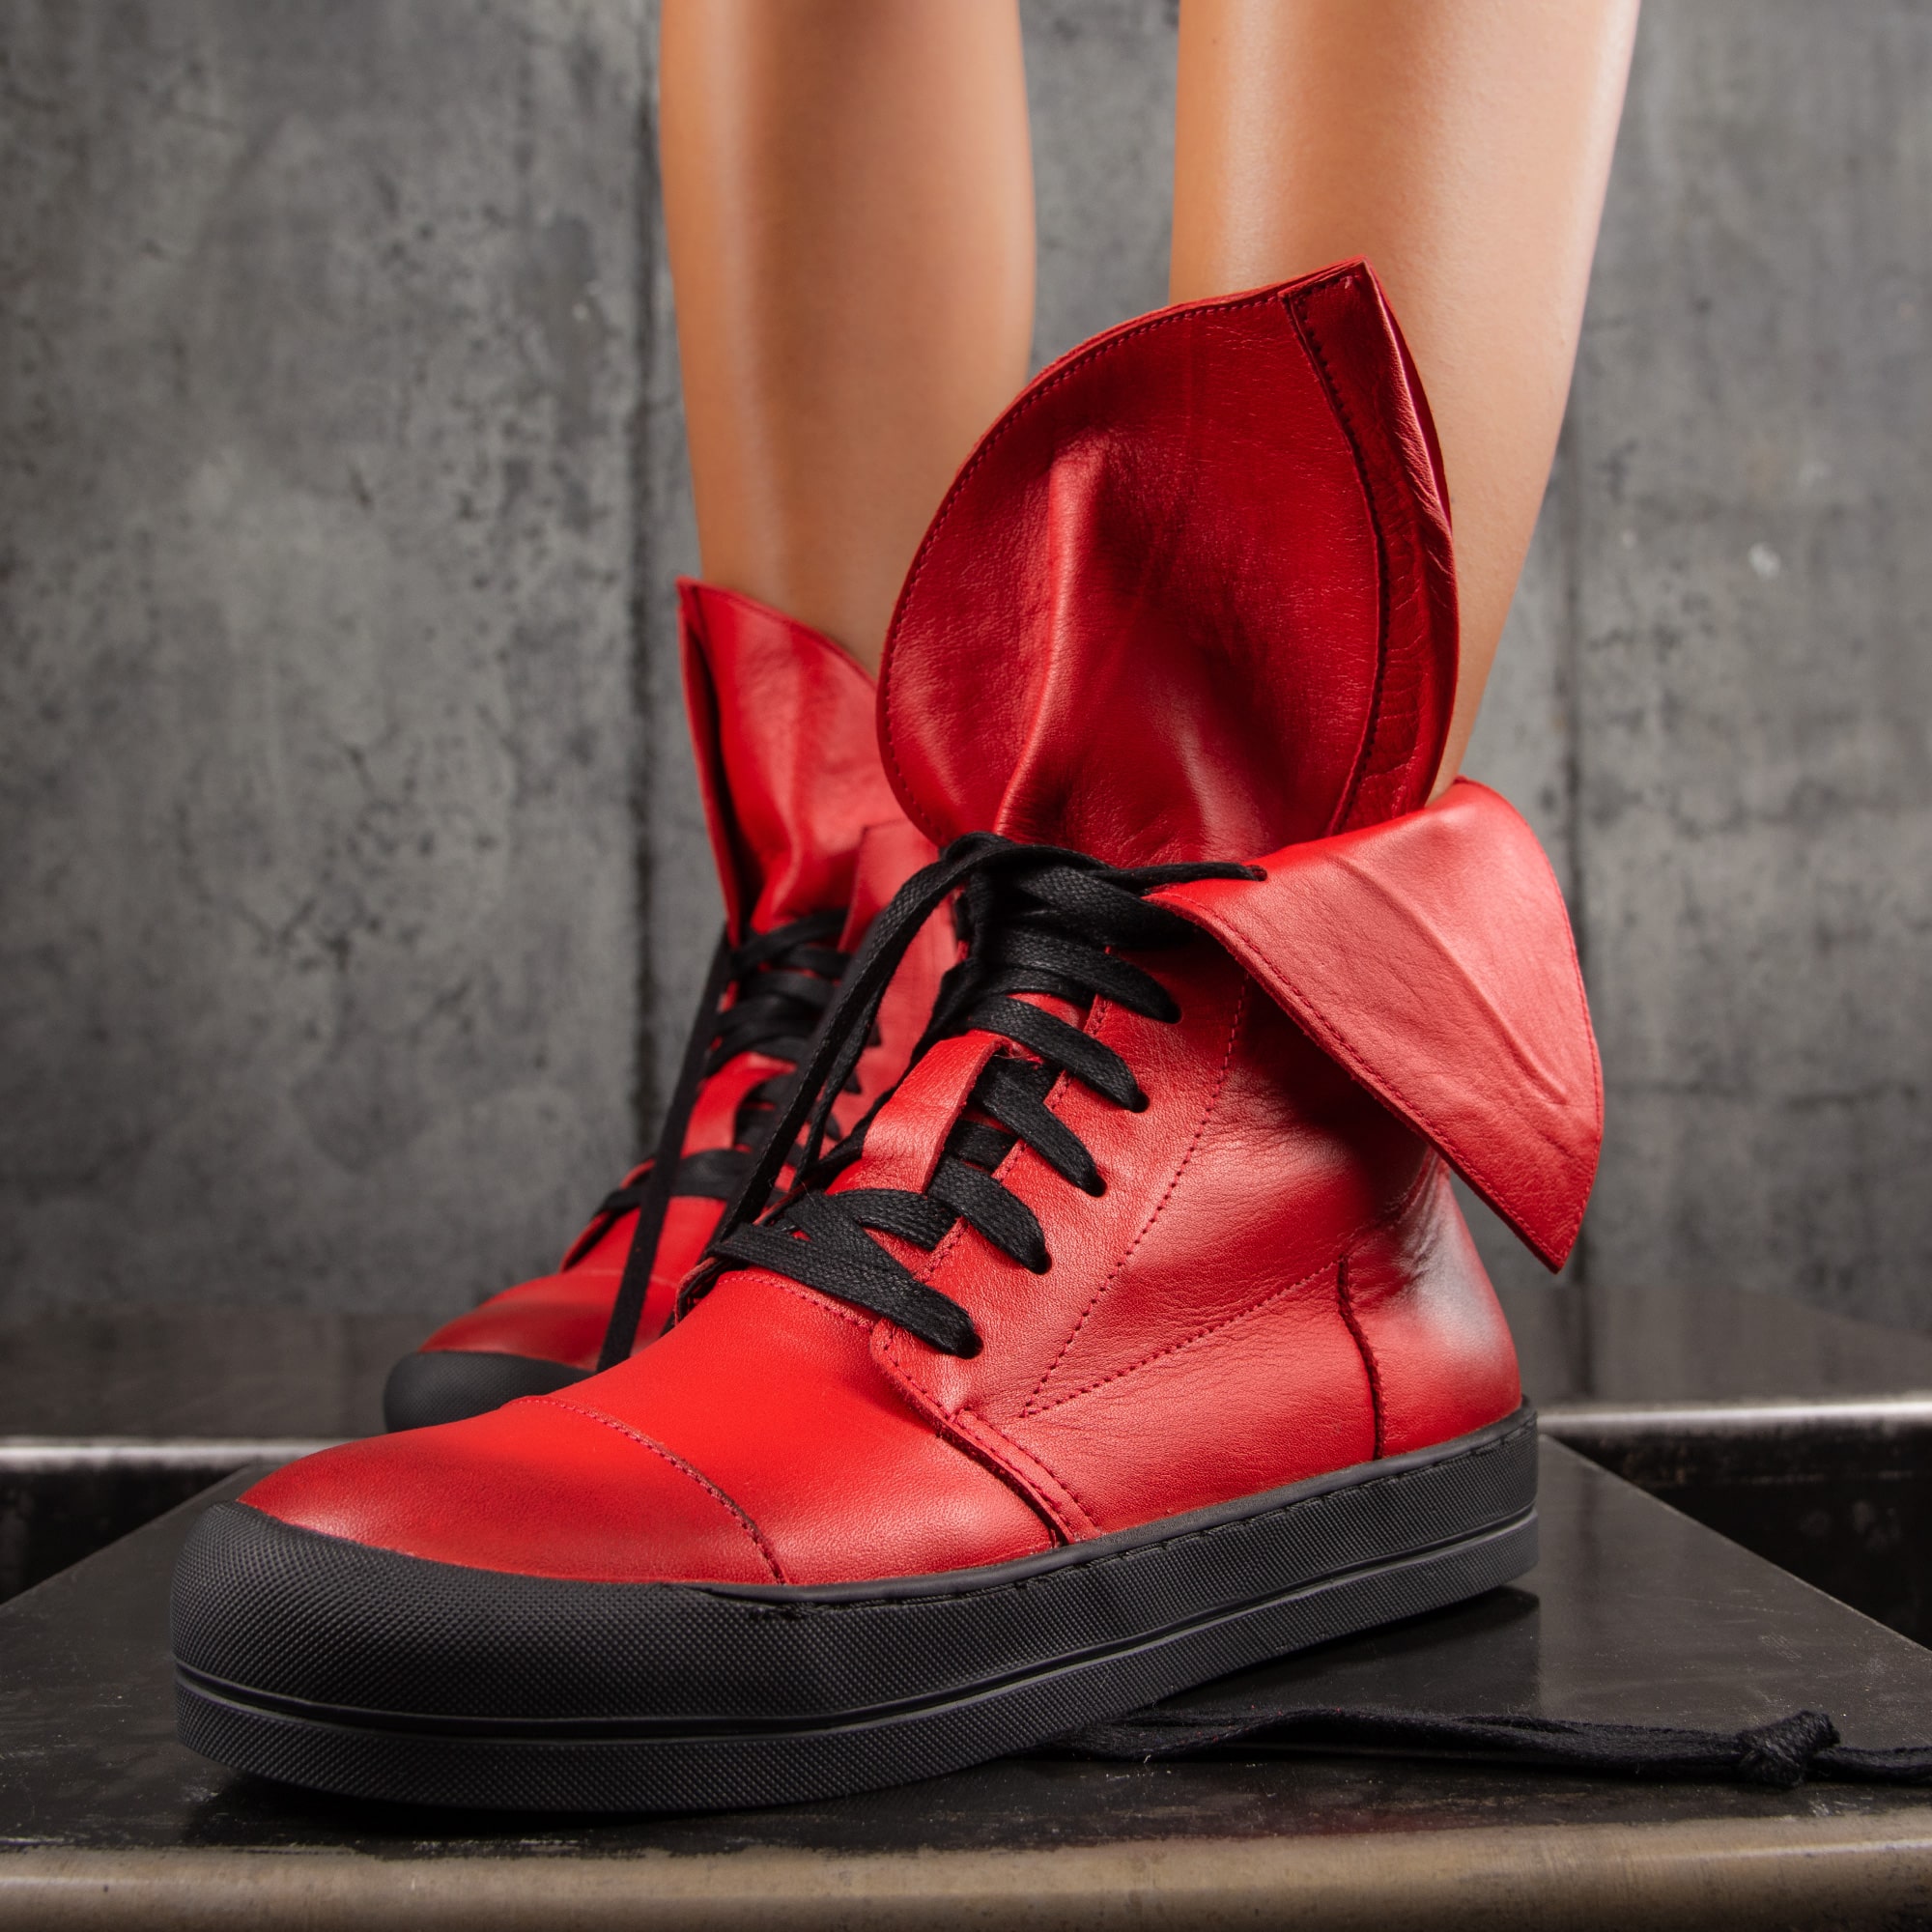 Olenna Leather Sneakers, Red Color